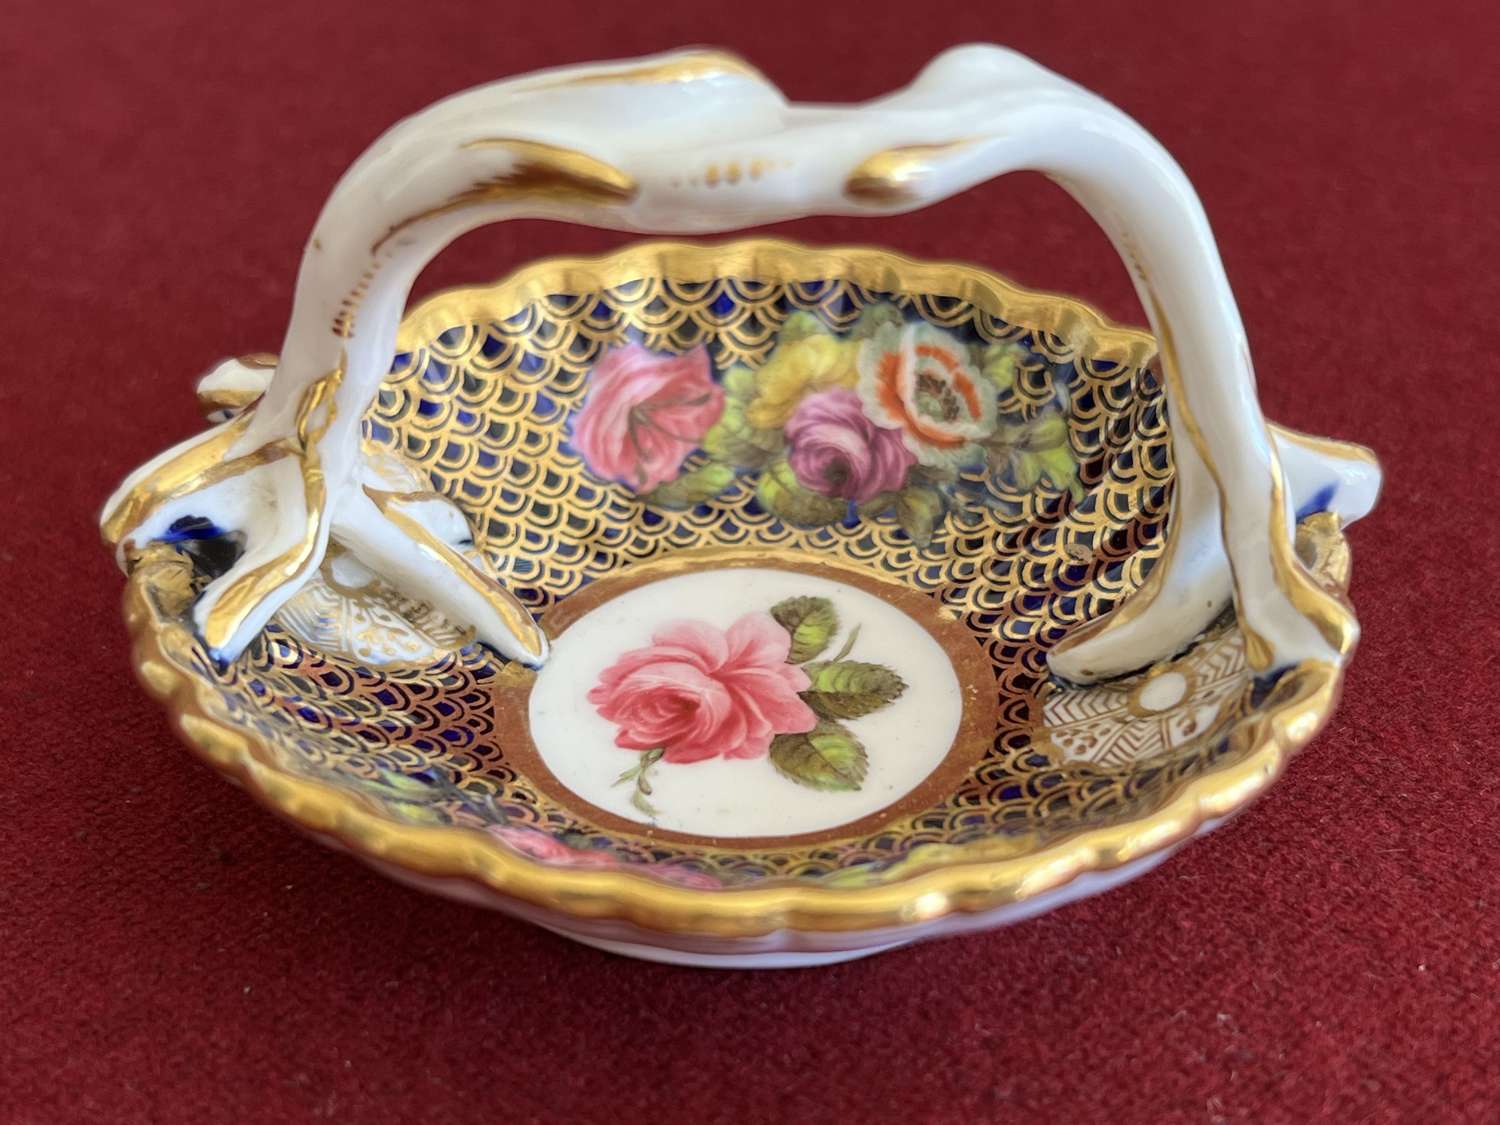 A Spode porcelain miniature basket decorated in pattern 1166 c.1815